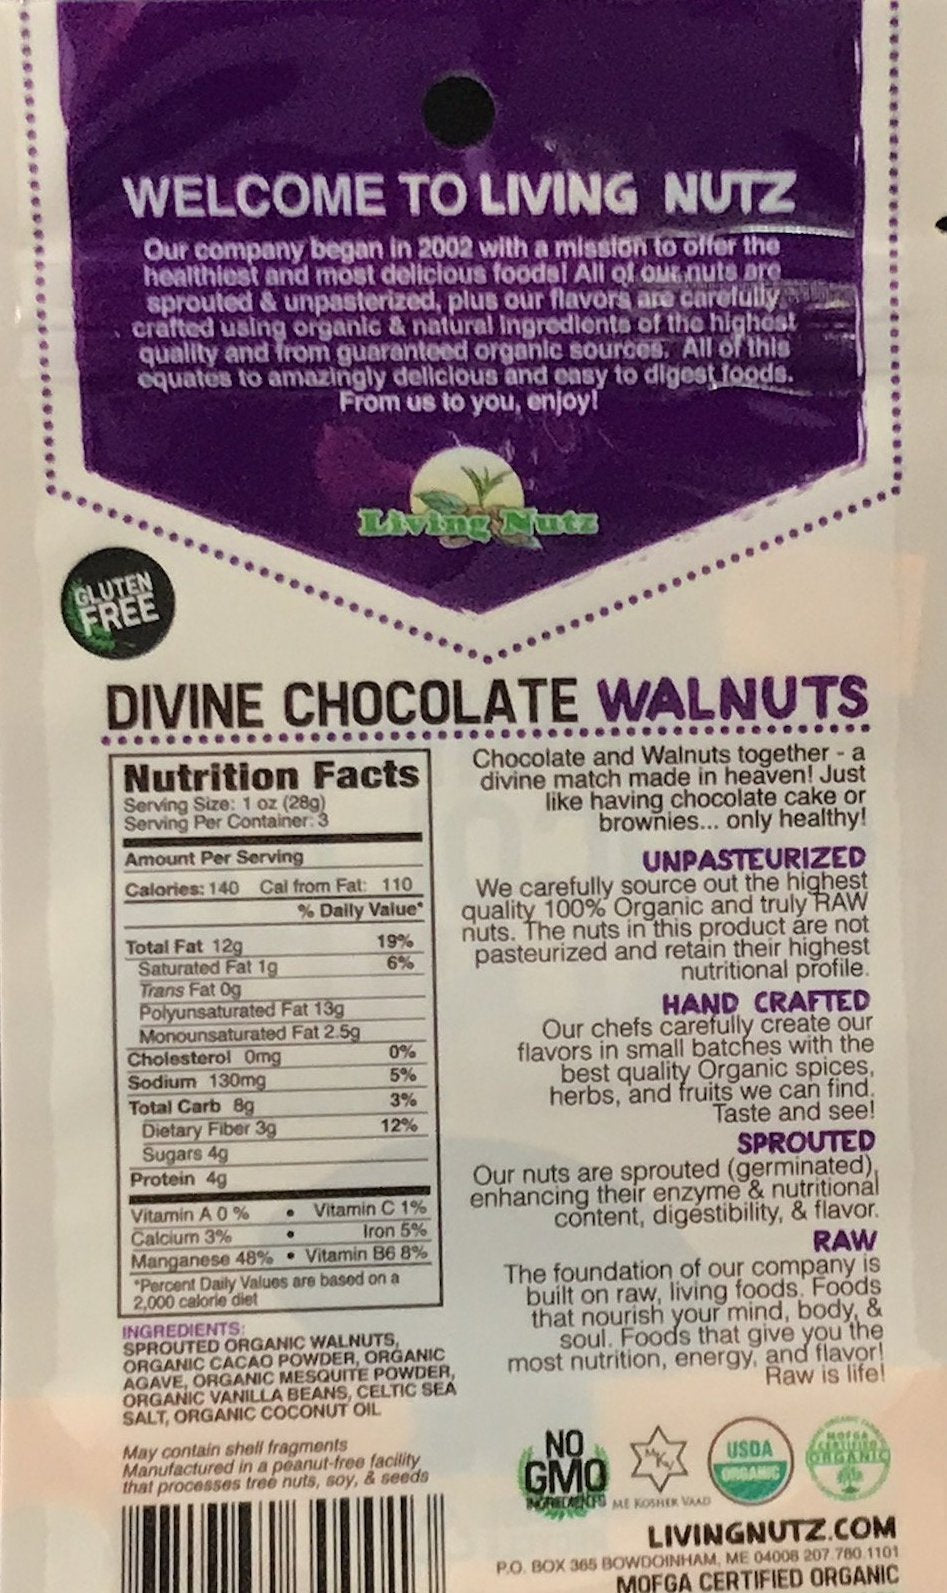 Organic raw sprouted nuts. Sprouted raw Walnuts with chocolate. Healthy truth about nuts!